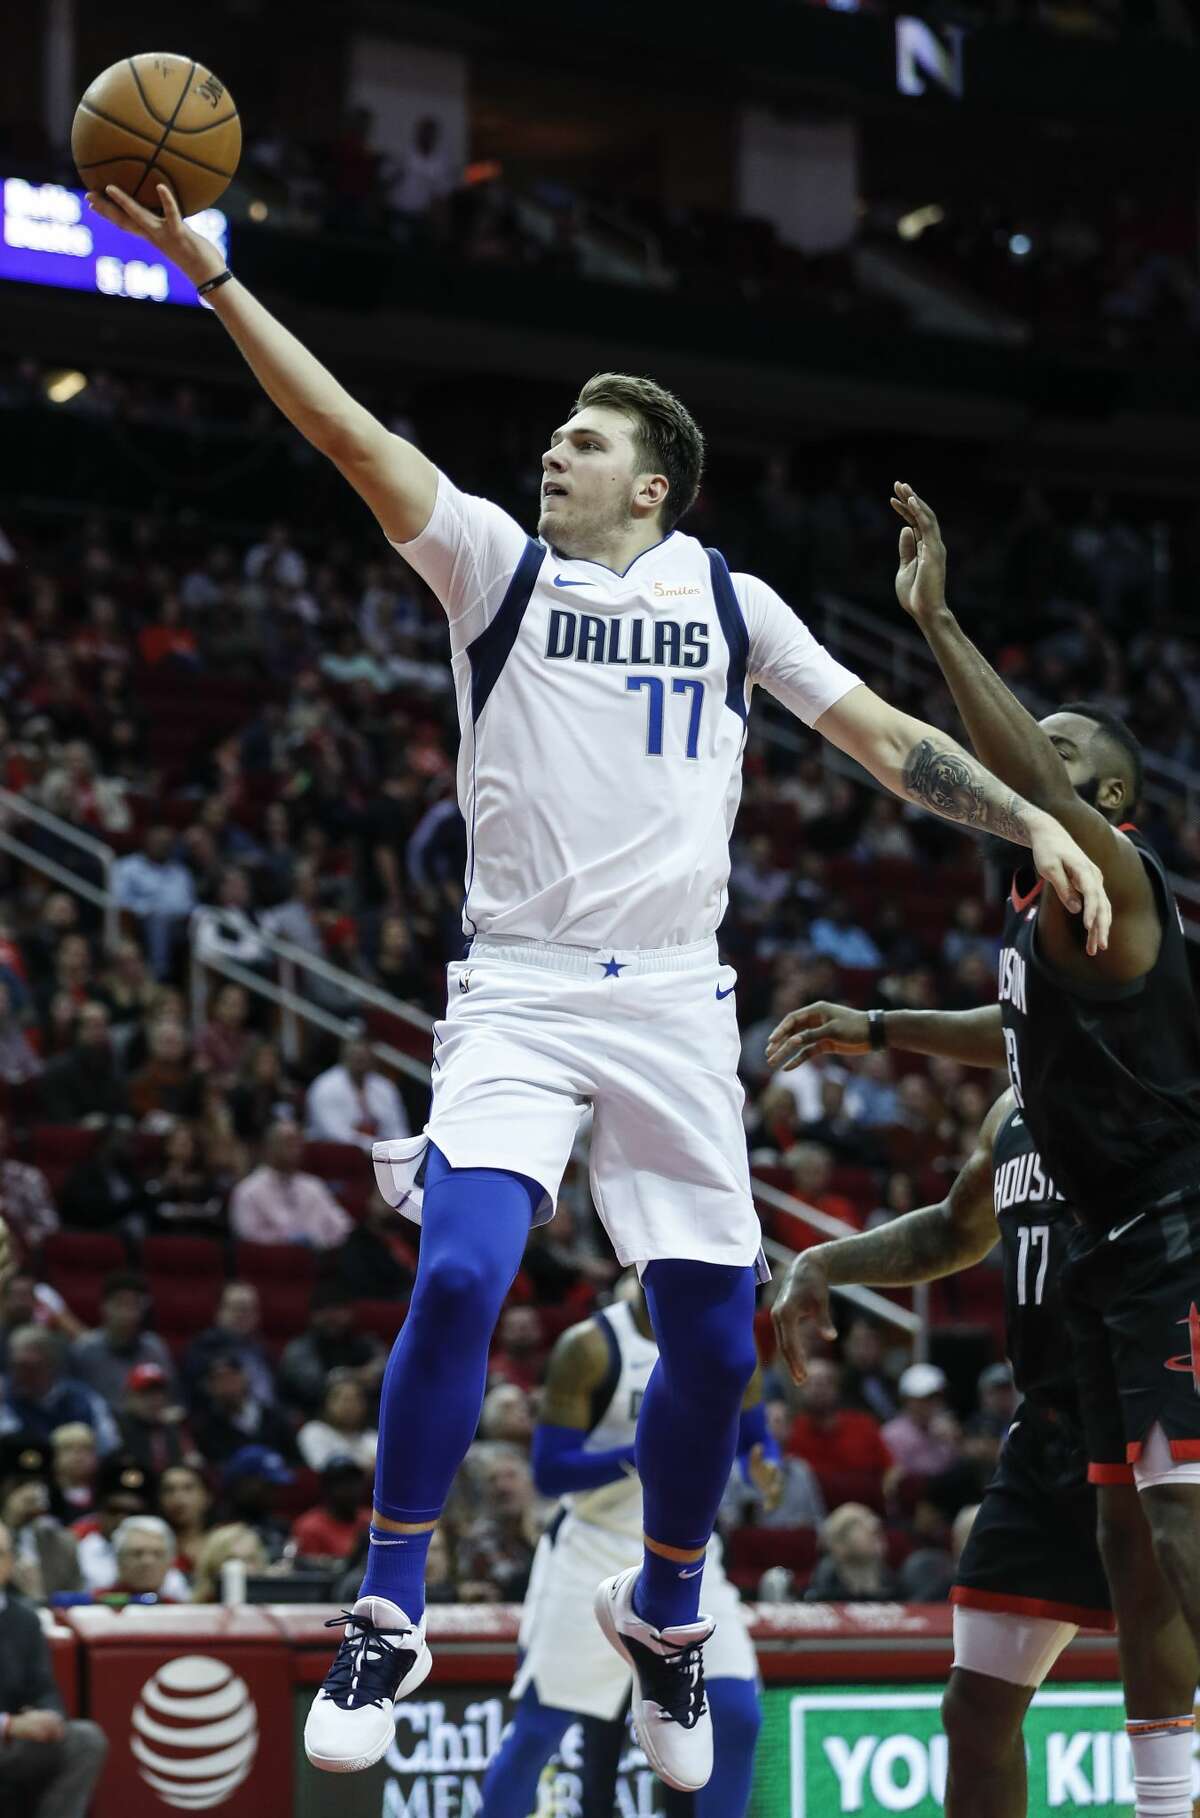 Dallas Mavericks forward Luka Doncic (77) shoots a layup after driving past Houston Rockets guard James Harden (13) during the second half of an NBA basketball game at Toyota Center on Wednesday, Nov. 28, 2018, in Houston.